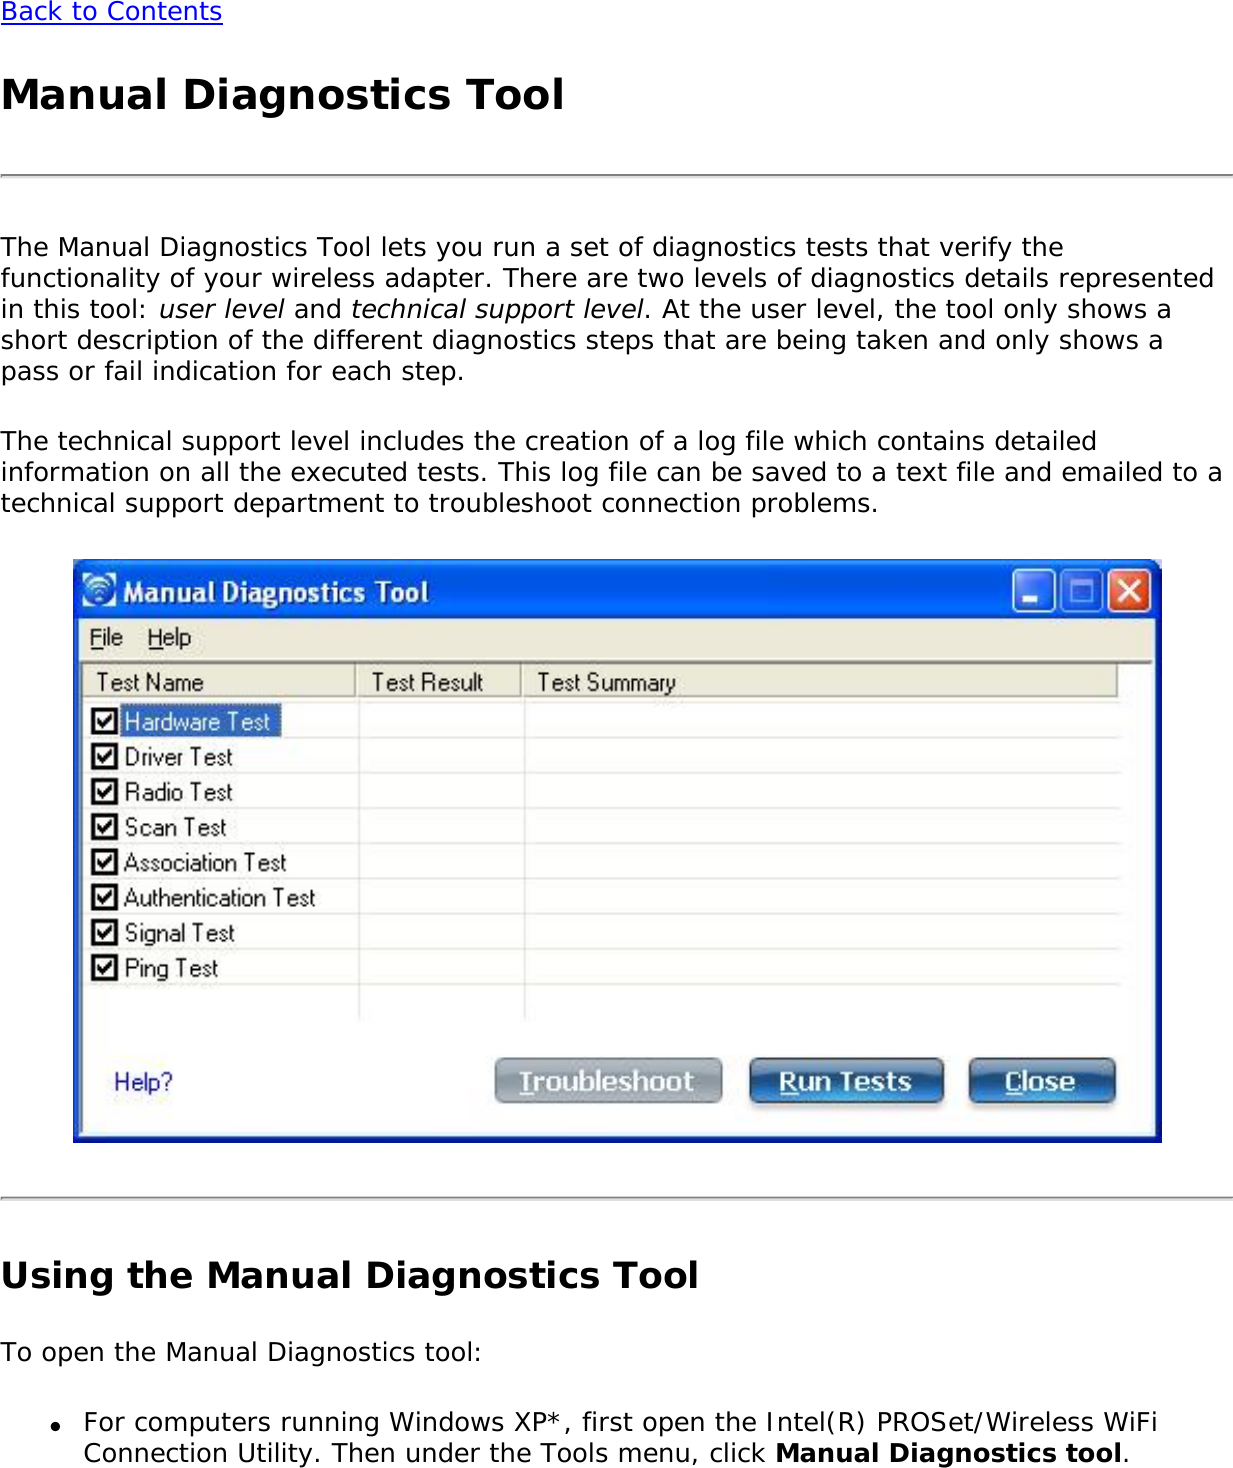 Back to ContentsManual Diagnostics ToolThe Manual Diagnostics Tool lets you run a set of diagnostics tests that verify the functionality of your wireless adapter. There are two levels of diagnostics details represented in this tool: user level and technical support level. At the user level, the tool only shows a short description of the different diagnostics steps that are being taken and only shows a pass or fail indication for each step. The technical support level includes the creation of a log file which contains detailed information on all the executed tests. This log file can be saved to a text file and emailed to a technical support department to troubleshoot connection problems.Using the Manual Diagnostics ToolTo open the Manual Diagnostics tool: ●     For computers running Windows XP*, first open the Intel(R) PROSet/Wireless WiFi Connection Utility. Then under the Tools menu, click Manual Diagnostics tool.